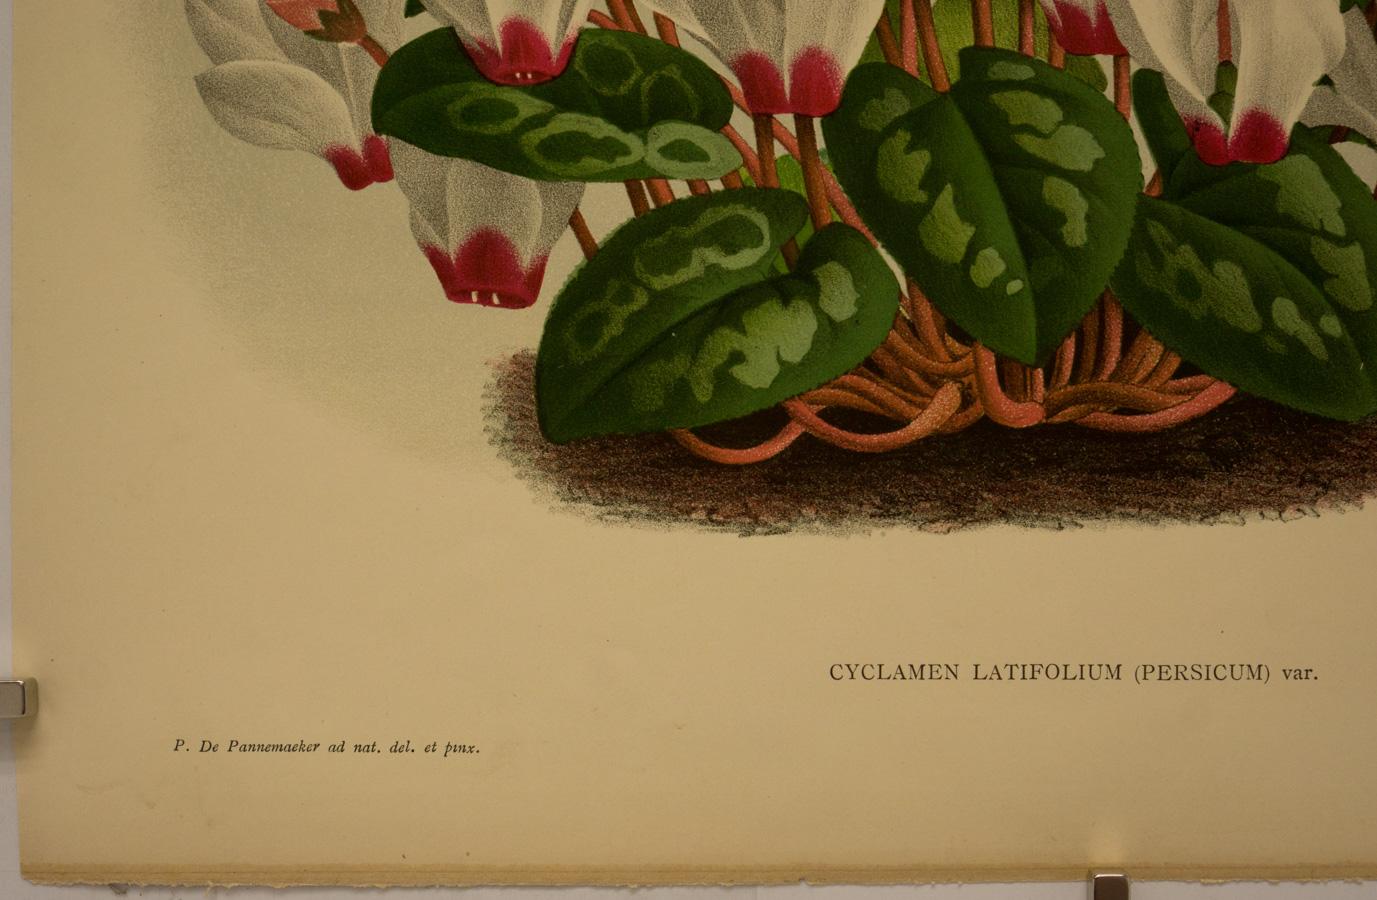 Chromolithograph after Peter De Pannemaeker, from L’Illustration Horticole: Revue Mensuelle Des Plantes Les Plus Remarquables [Horticulture Illustrated: The Monthly Journal of the Most Remarkable Plants]. Published by Jean Jules Linden (1817-1898)